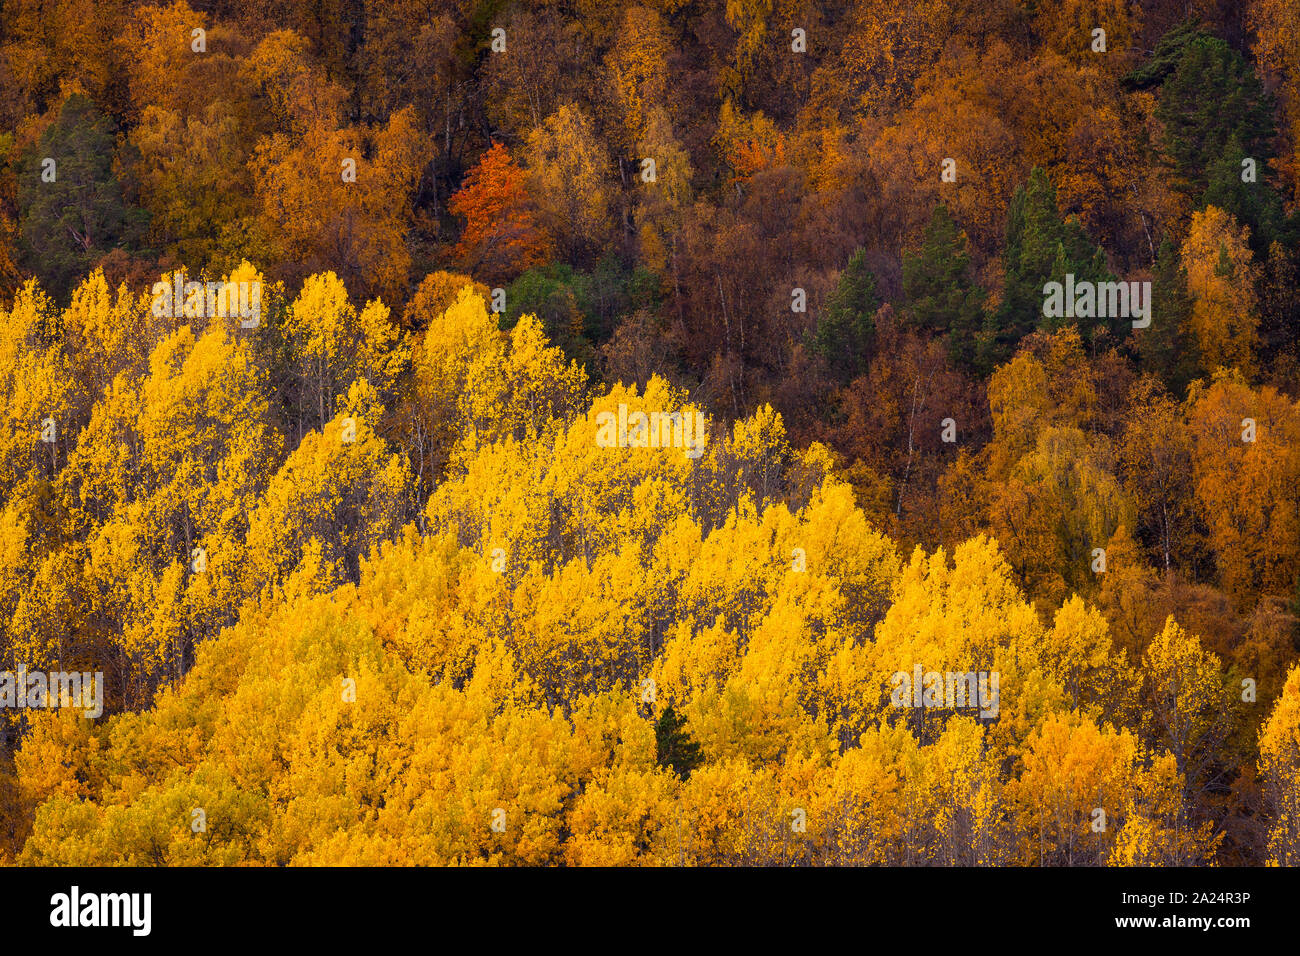 Amazing autumn coloured foliage at Dombås in Dovre kommune, Oppland fylke, Norway. The yellow trees are common aspen, Populus tremula. Stock Photo